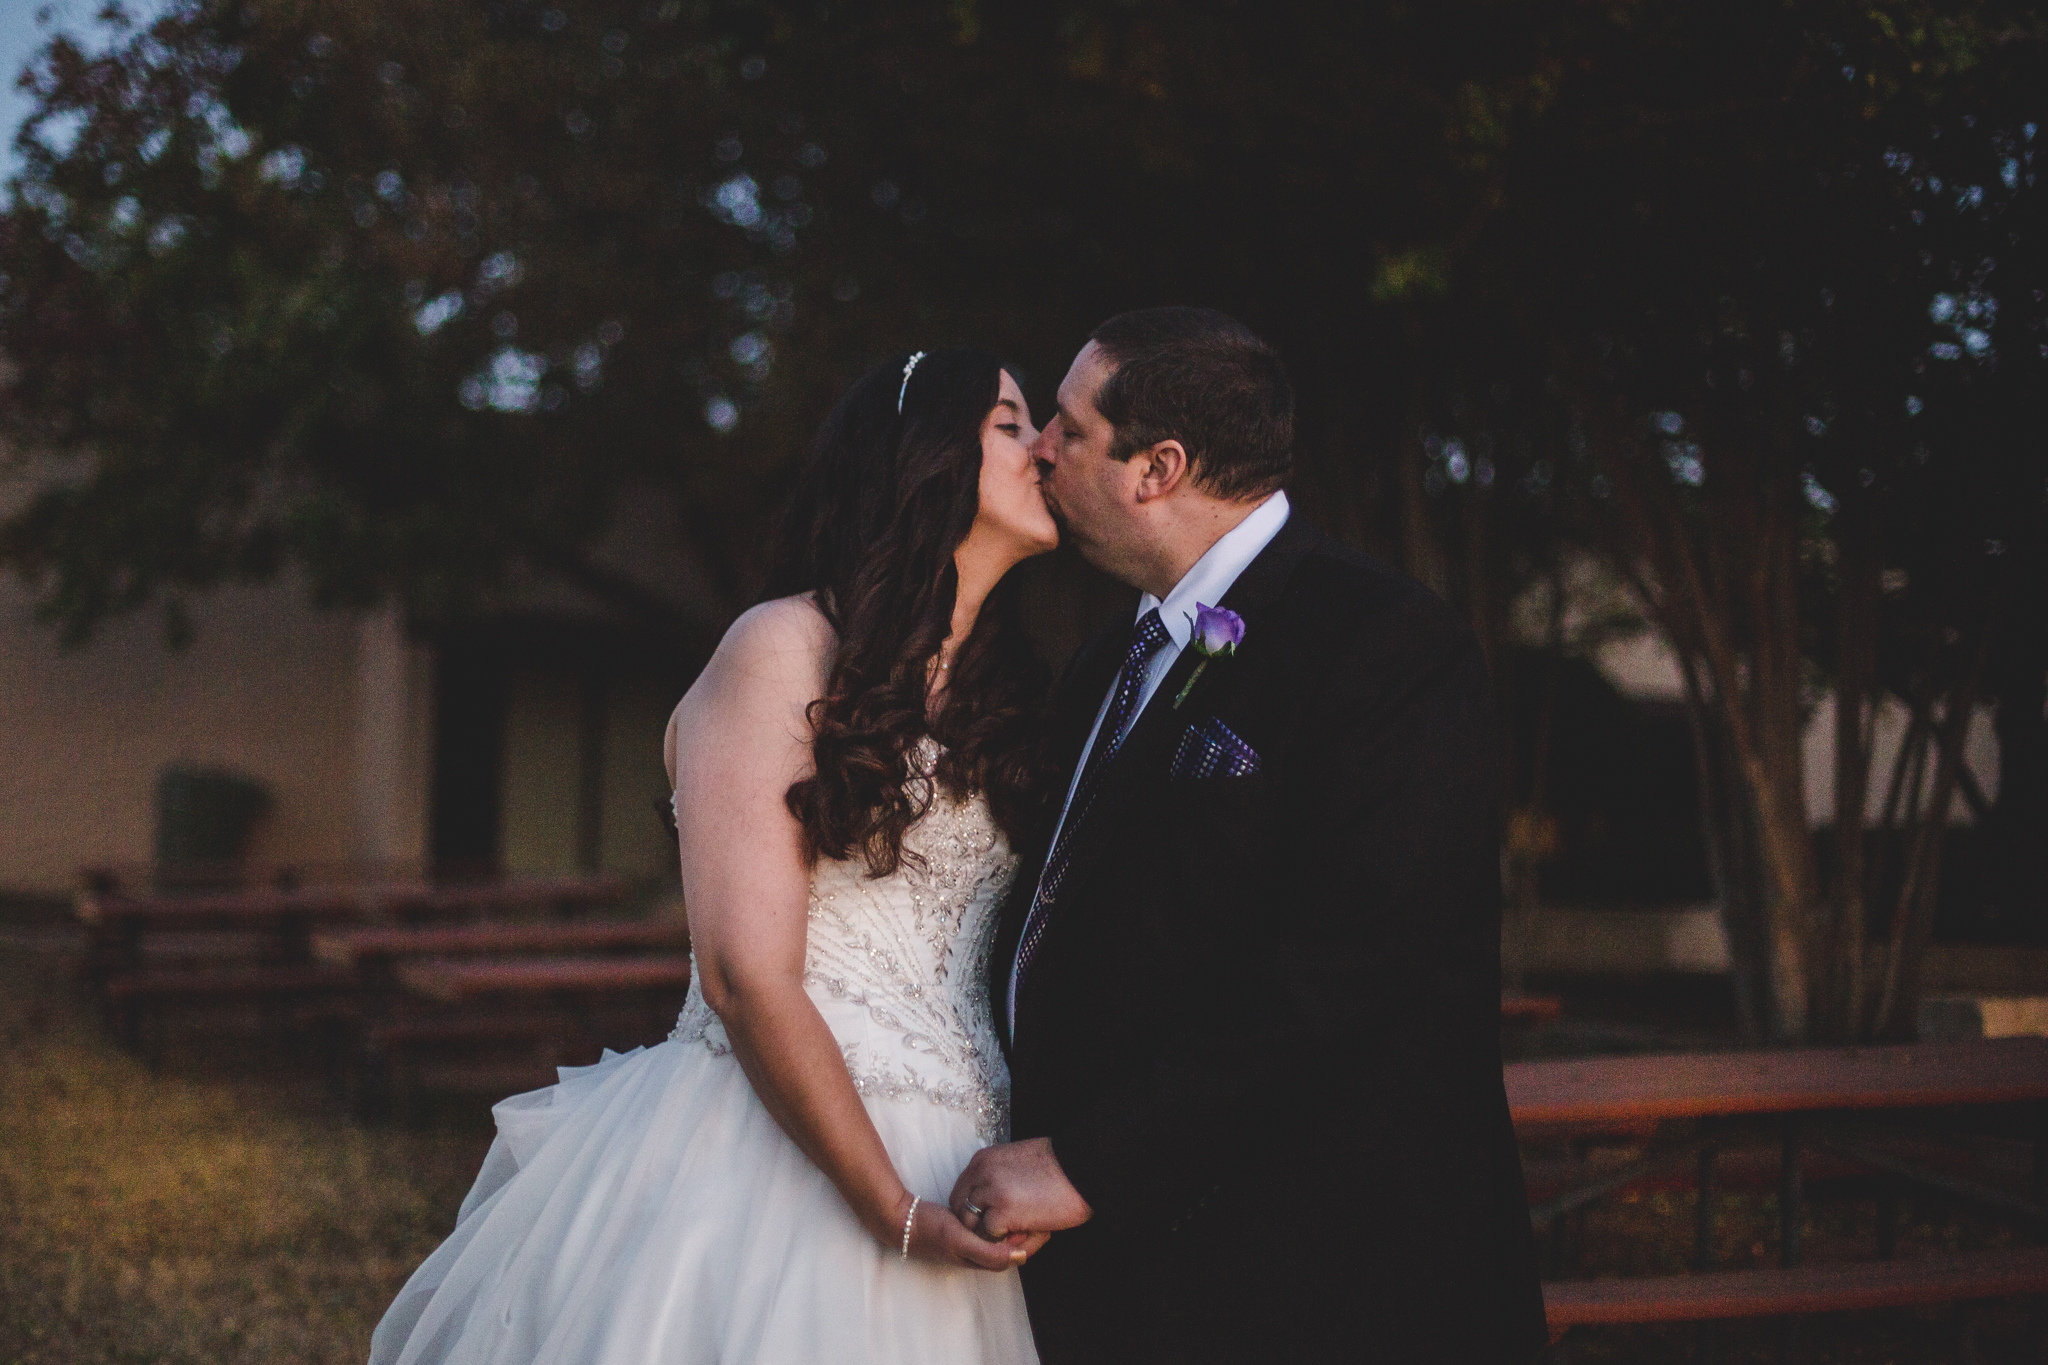 rs bride and portrait groom kiss outside at night